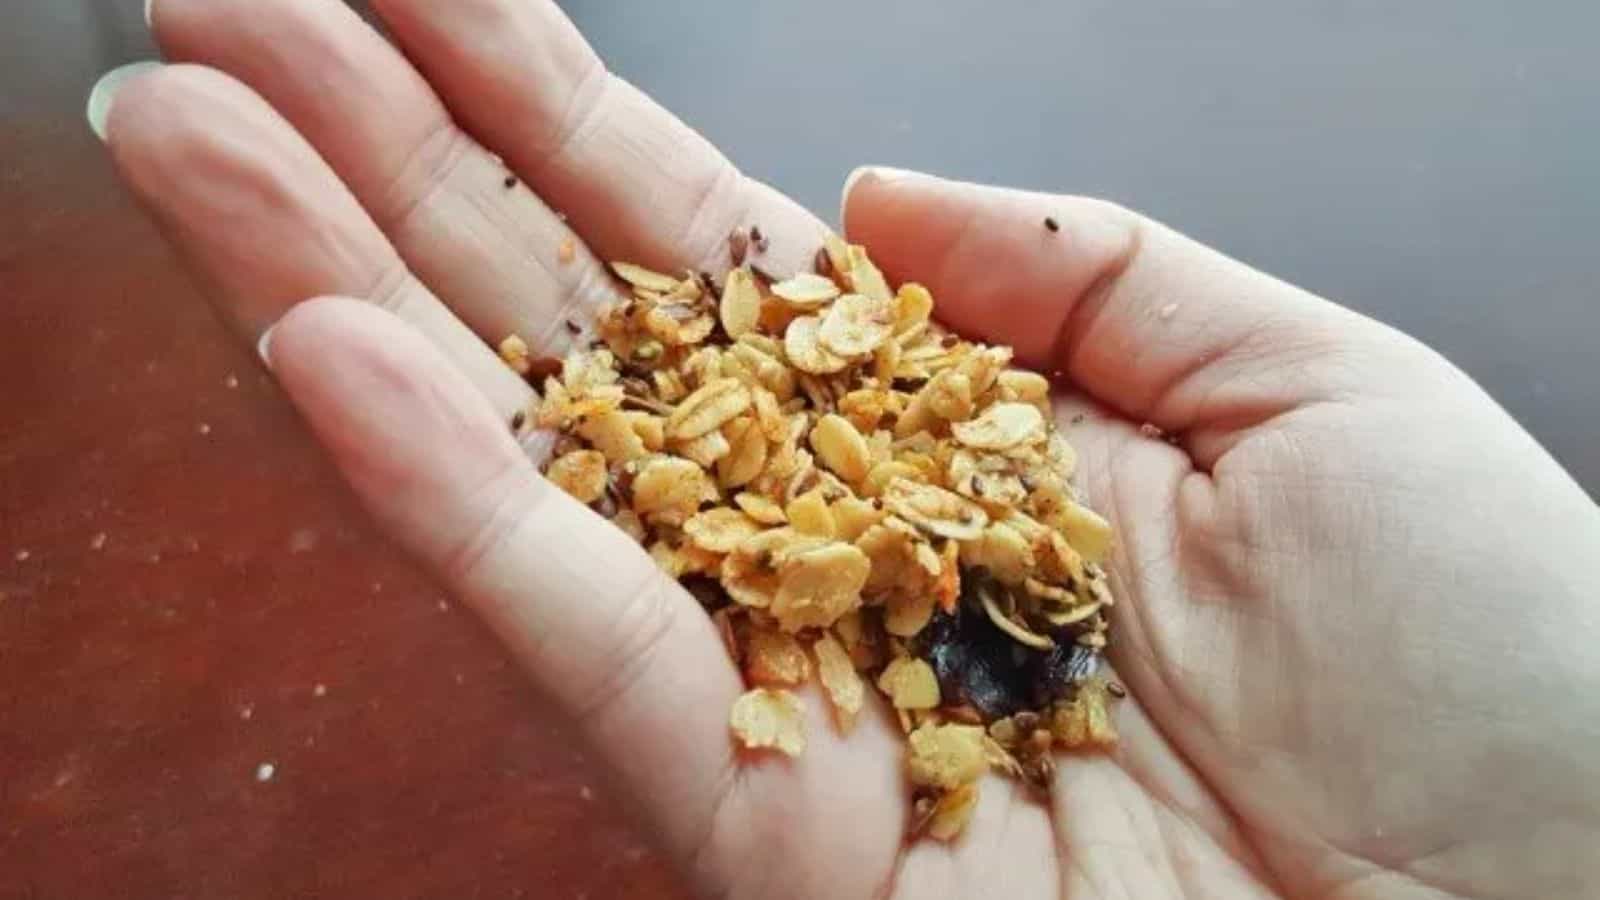 Image shows  A person holding a handful of granola in their hand.